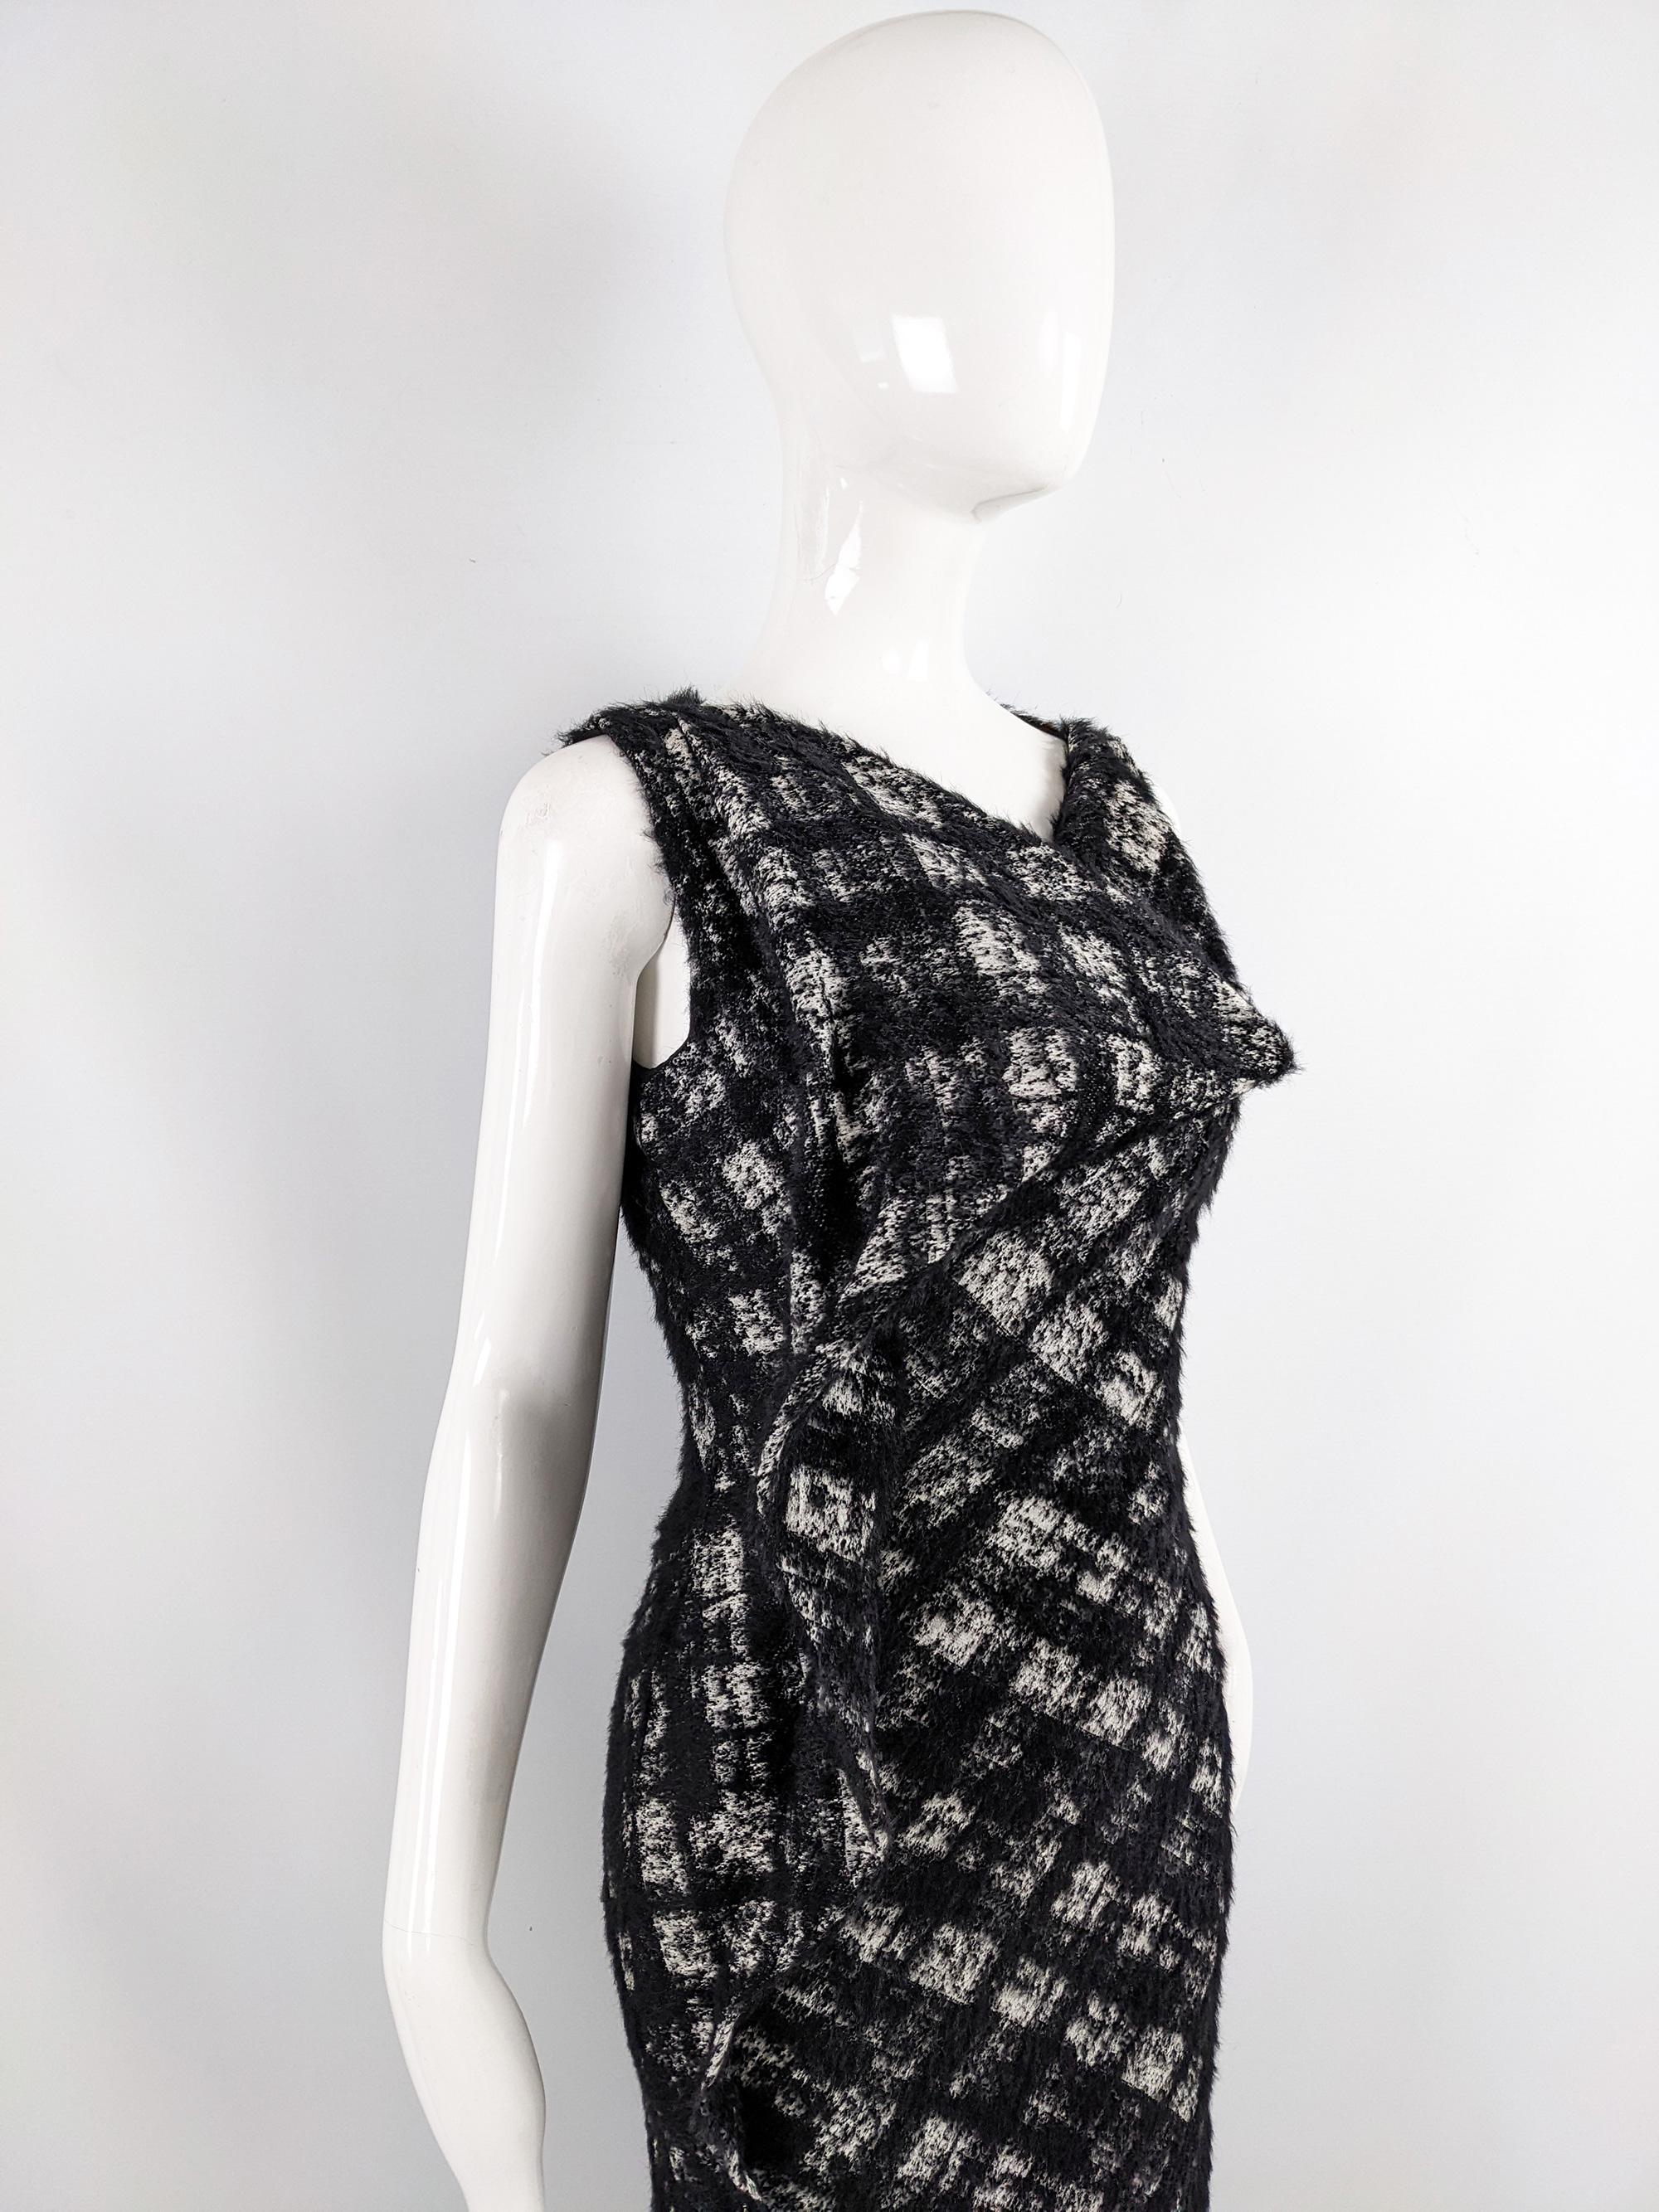 Plein Sud Vintage 1990s Architectural Wool Alpaca & Mohair Checked Party Dress 2